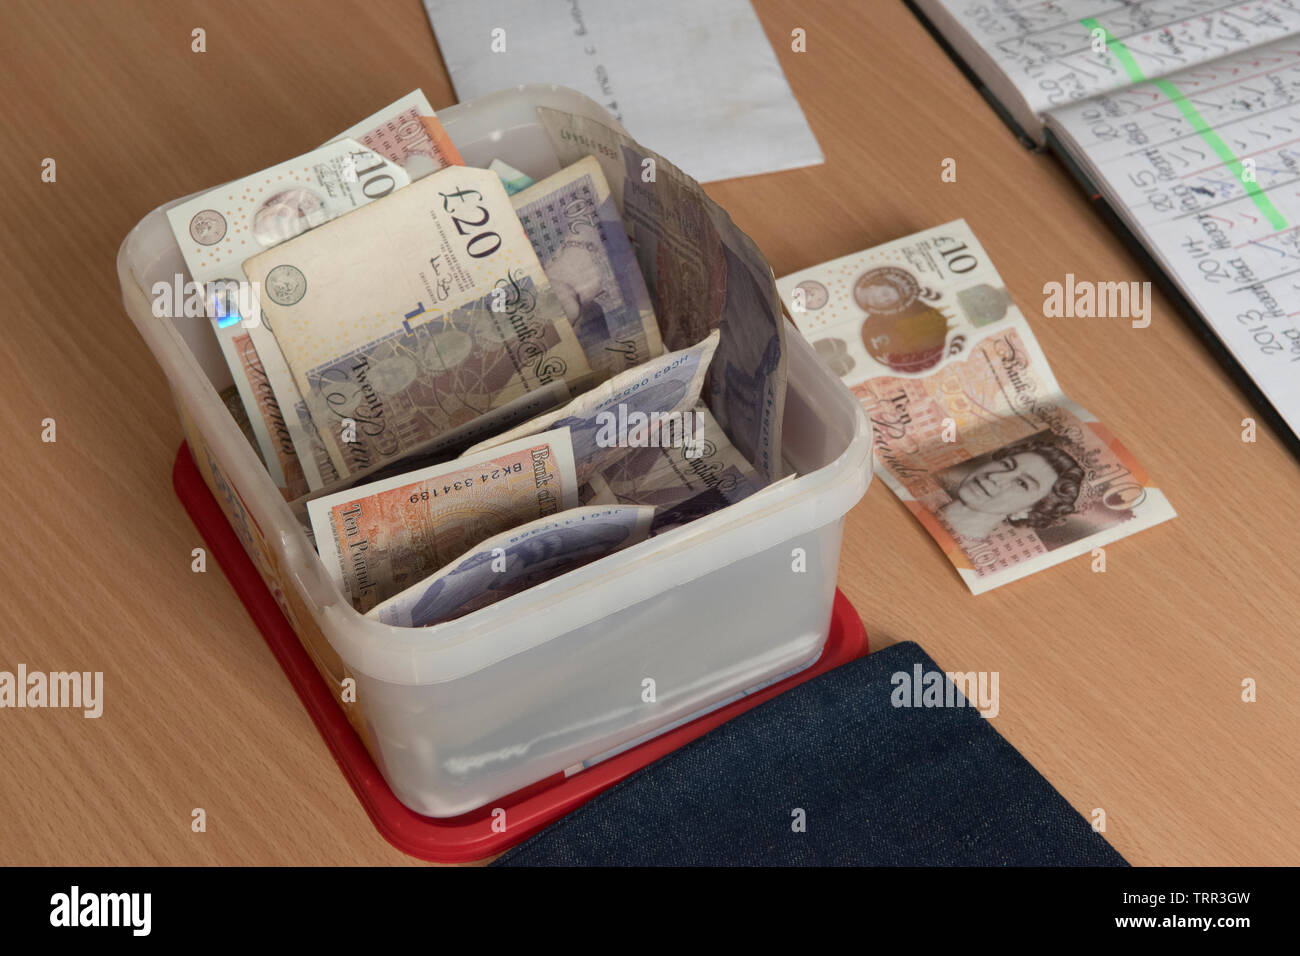 Money £20.00 and £10.00 notes in a plastic container 2010s Village group pay their annual subscription, HOMER SYKES Stock Photo